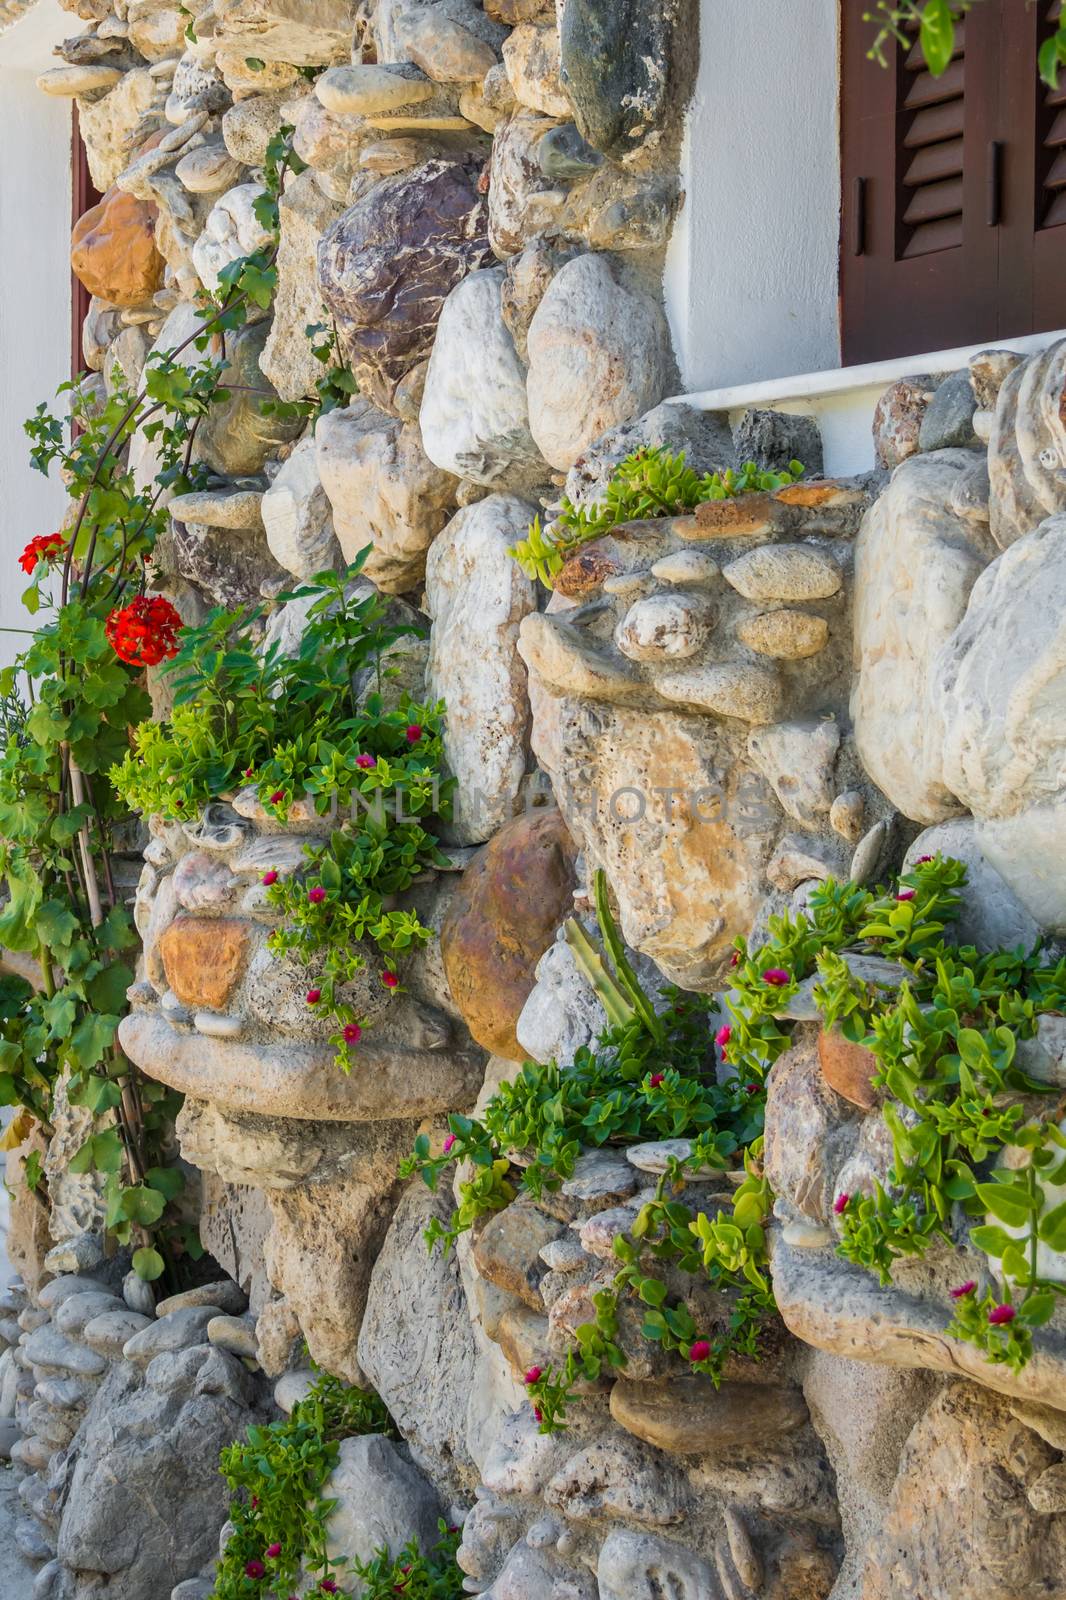 Natural stone wall with plants growing on it by MXW_Stock